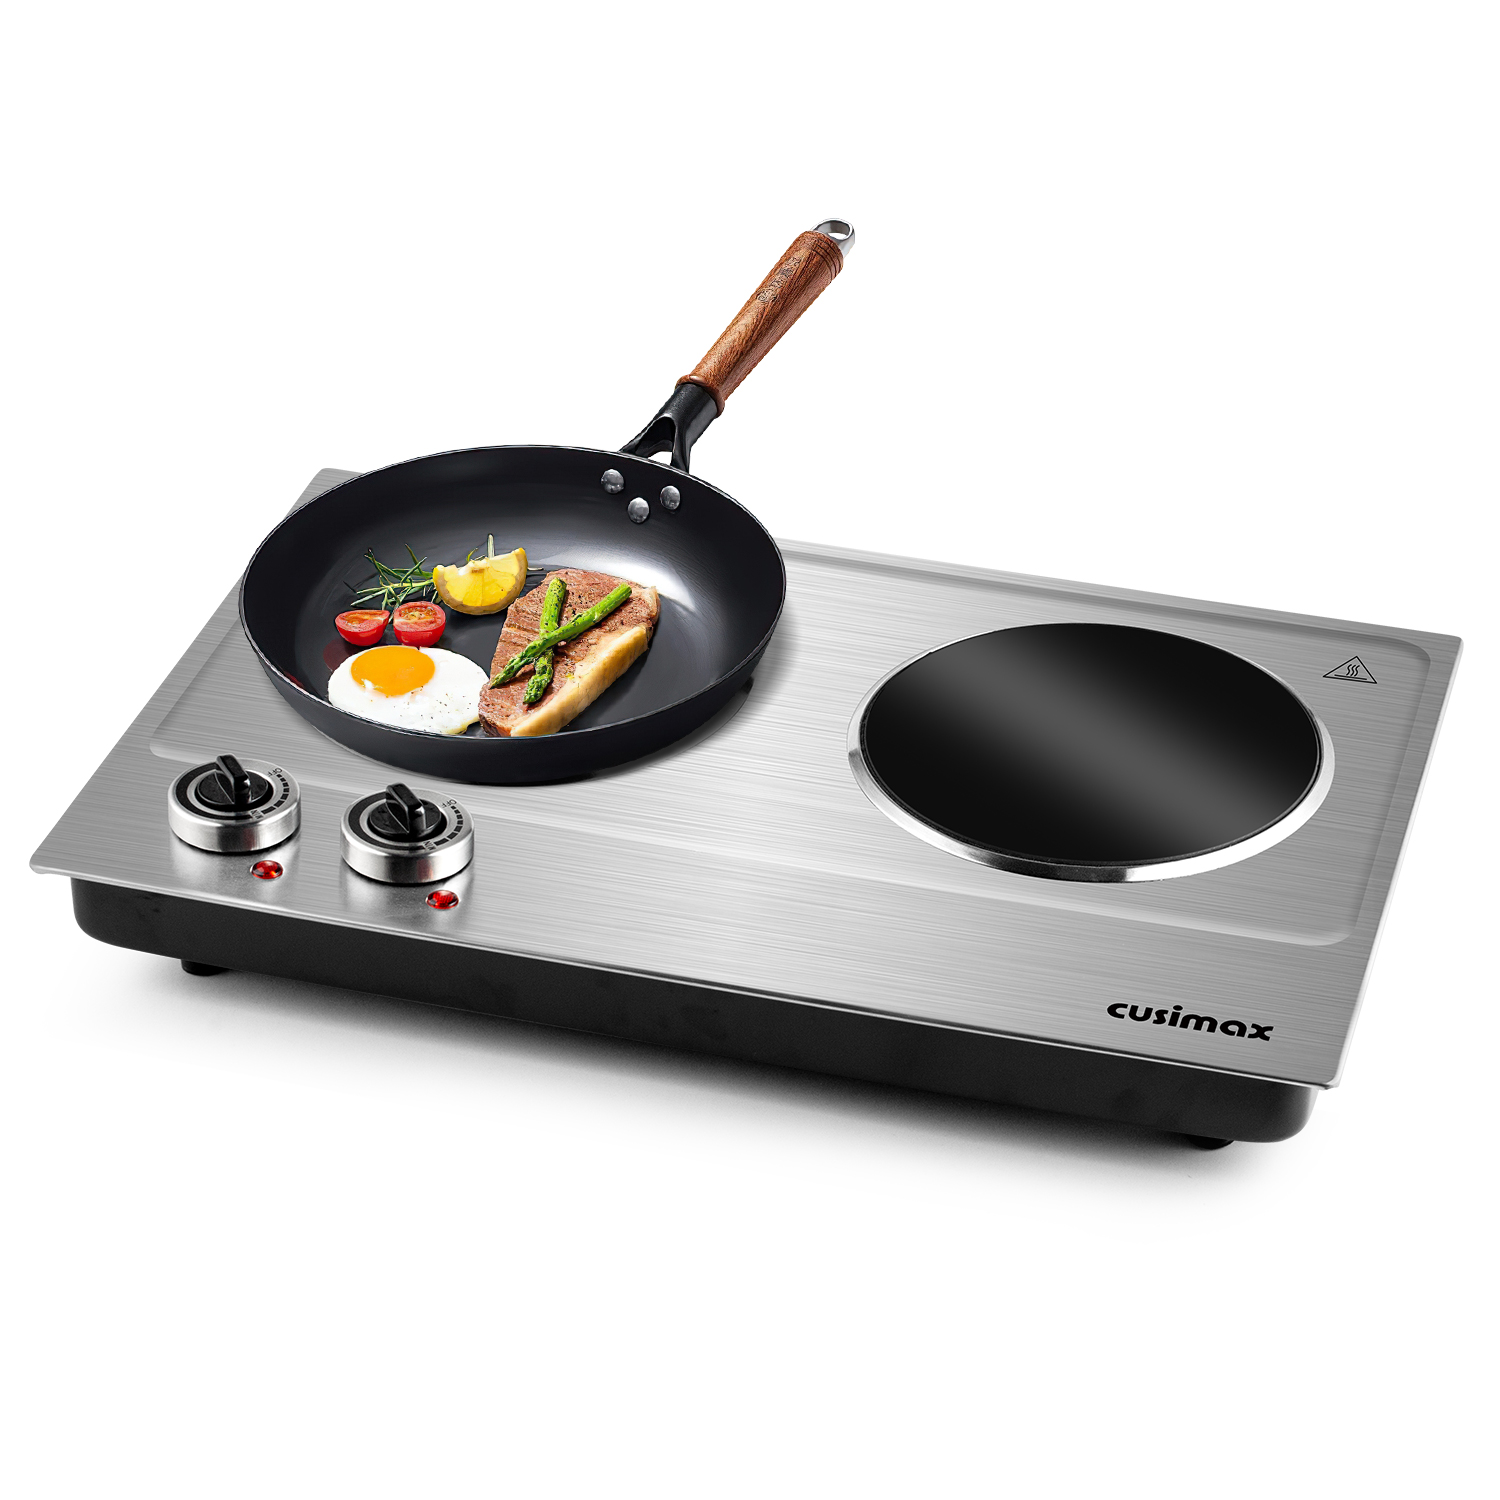 Cusimax 1800W Infrared Ceramic Electric Hot Plate for Cooking, Portable Countertop Burner Glass Heating Plate with 2 Knob Control,Stainless Steel Electric Stove,Easy To Clean,Upgraded Version